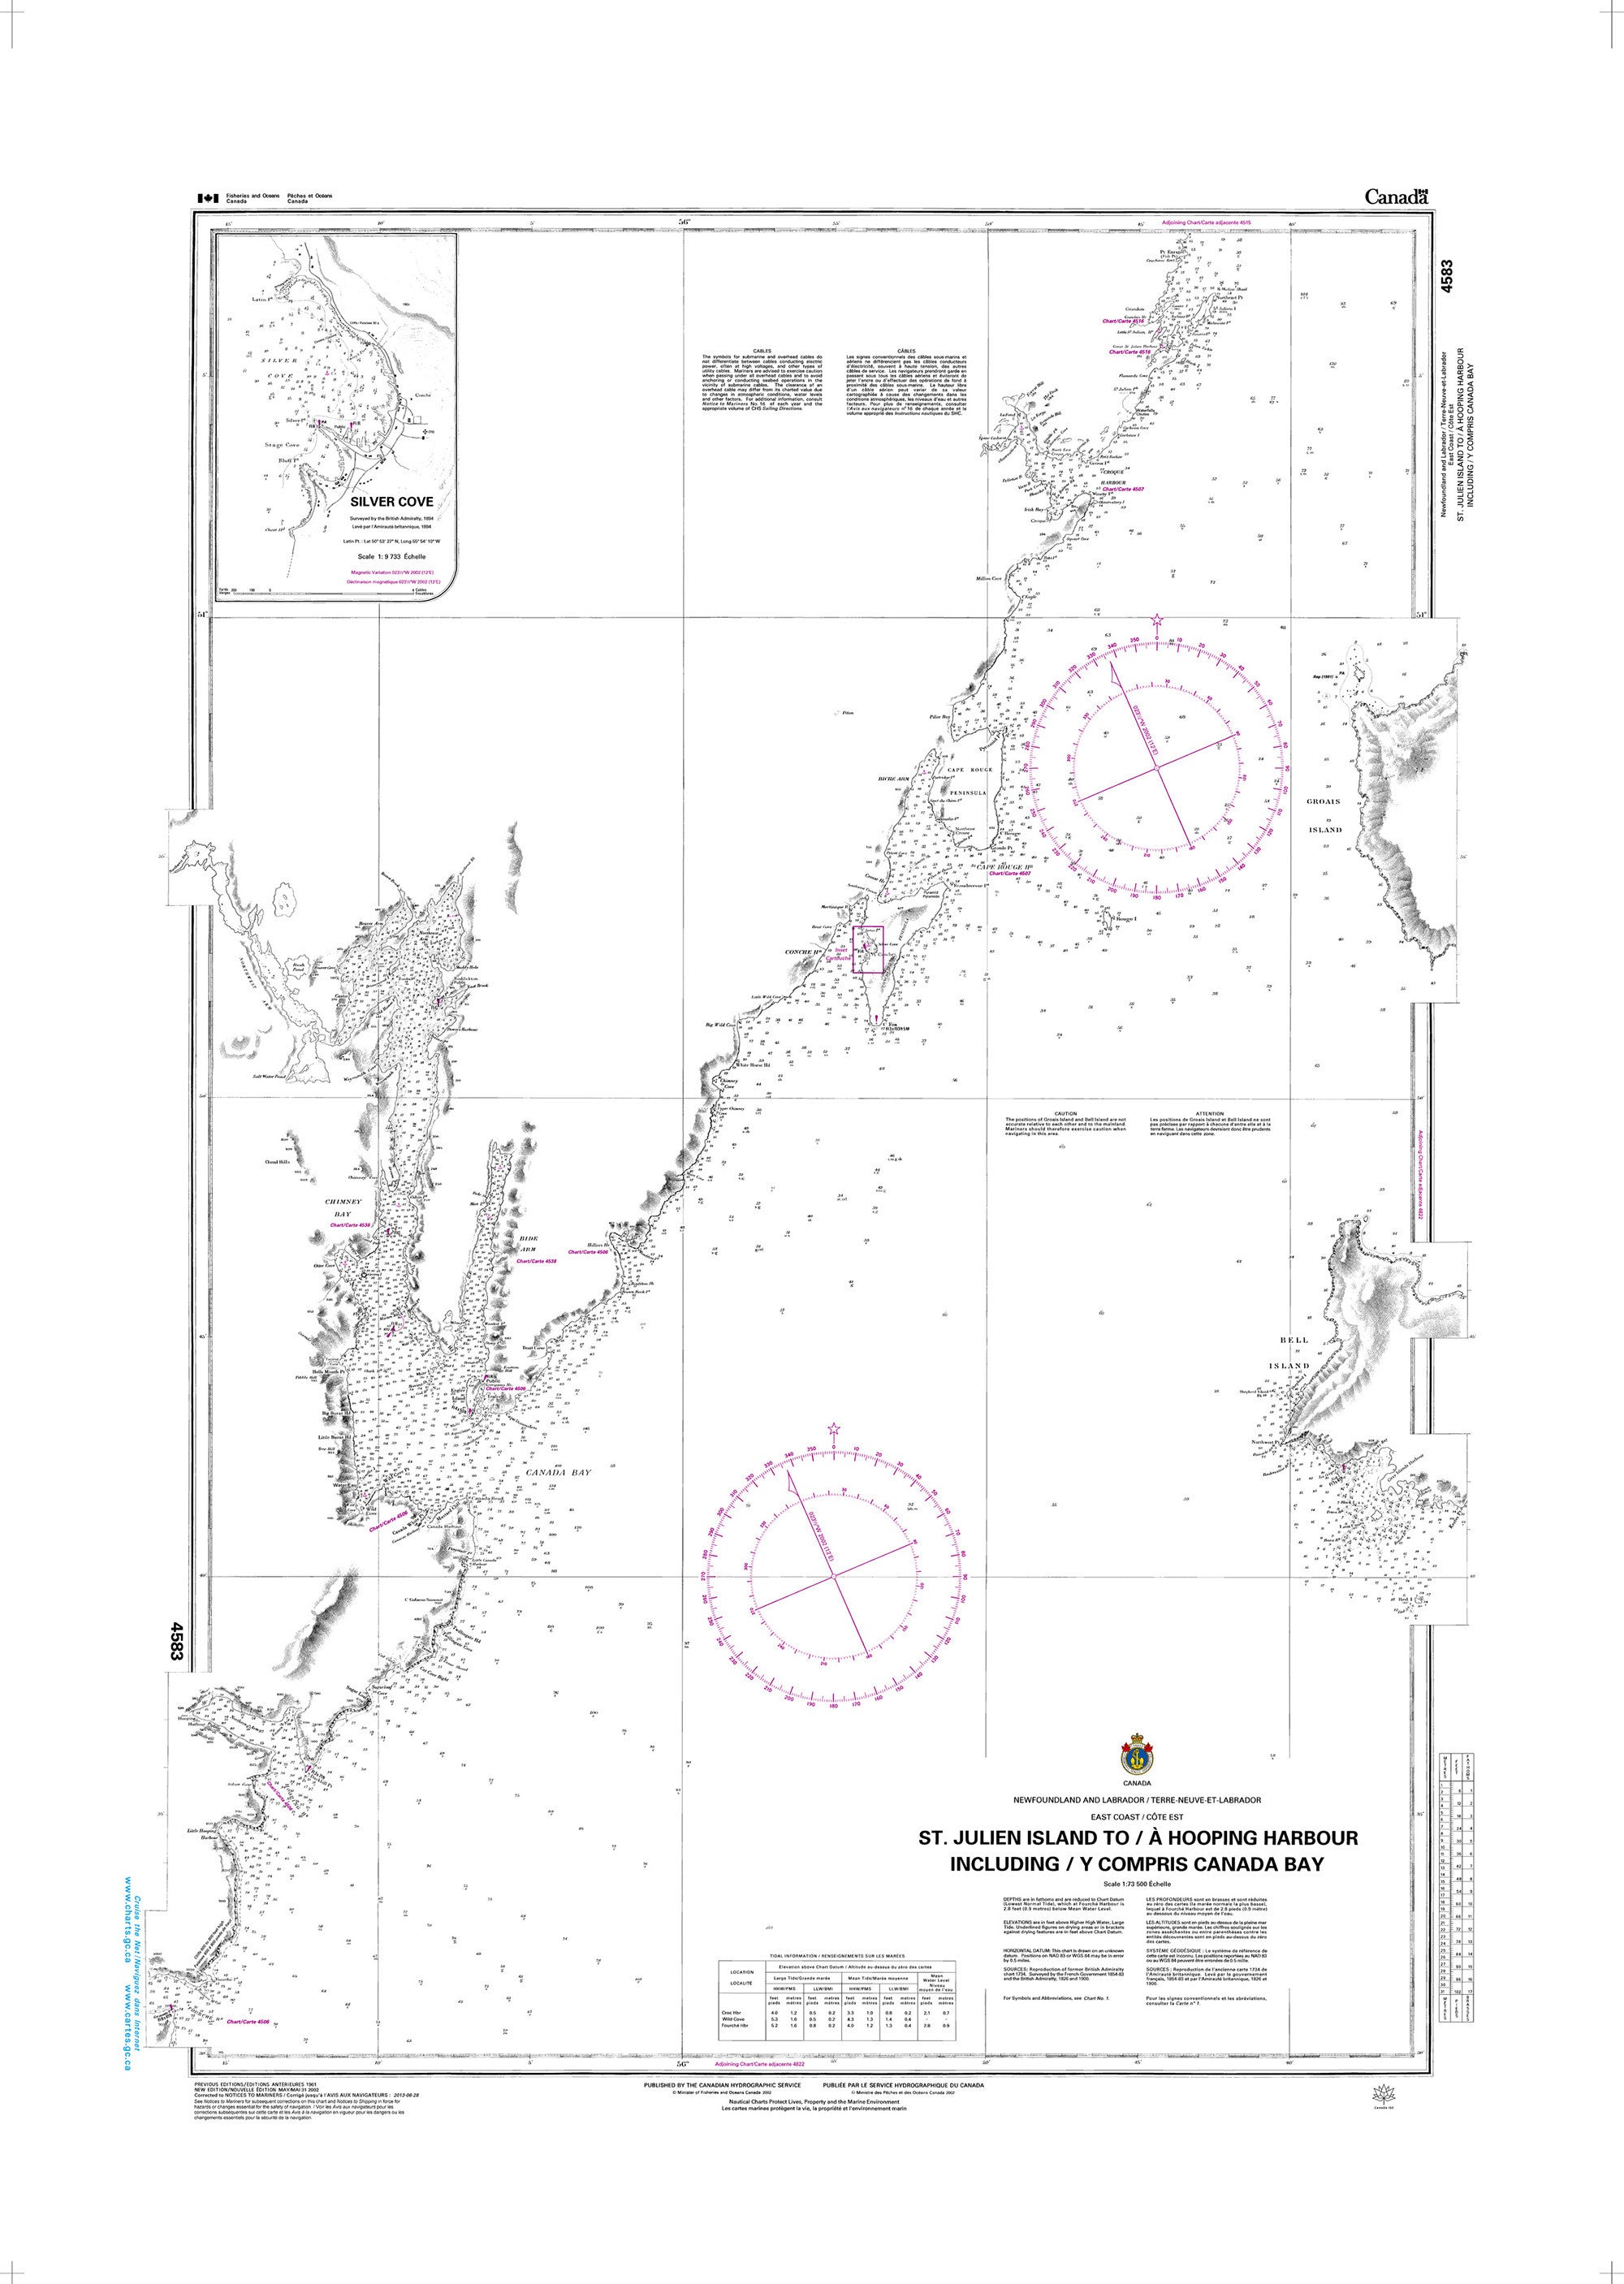 Canadian Hydrographic Service Nautical Chart CHS4583: St. Julien Island to/à Hooping Harbour including/y compris Canada Bay